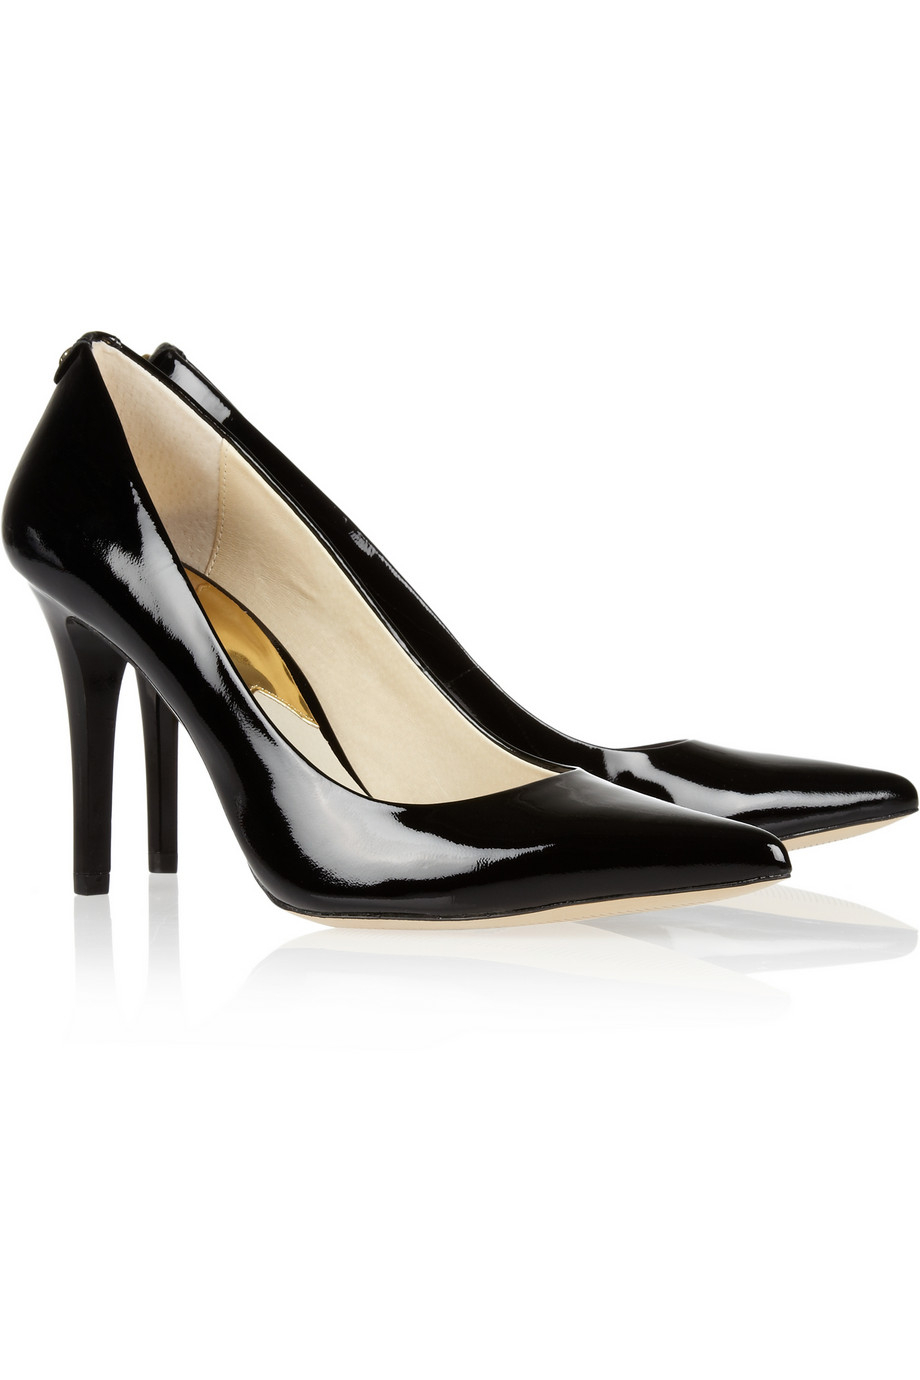 MICHAEL Michael Kors York Patent Leather Pumps in Nude 